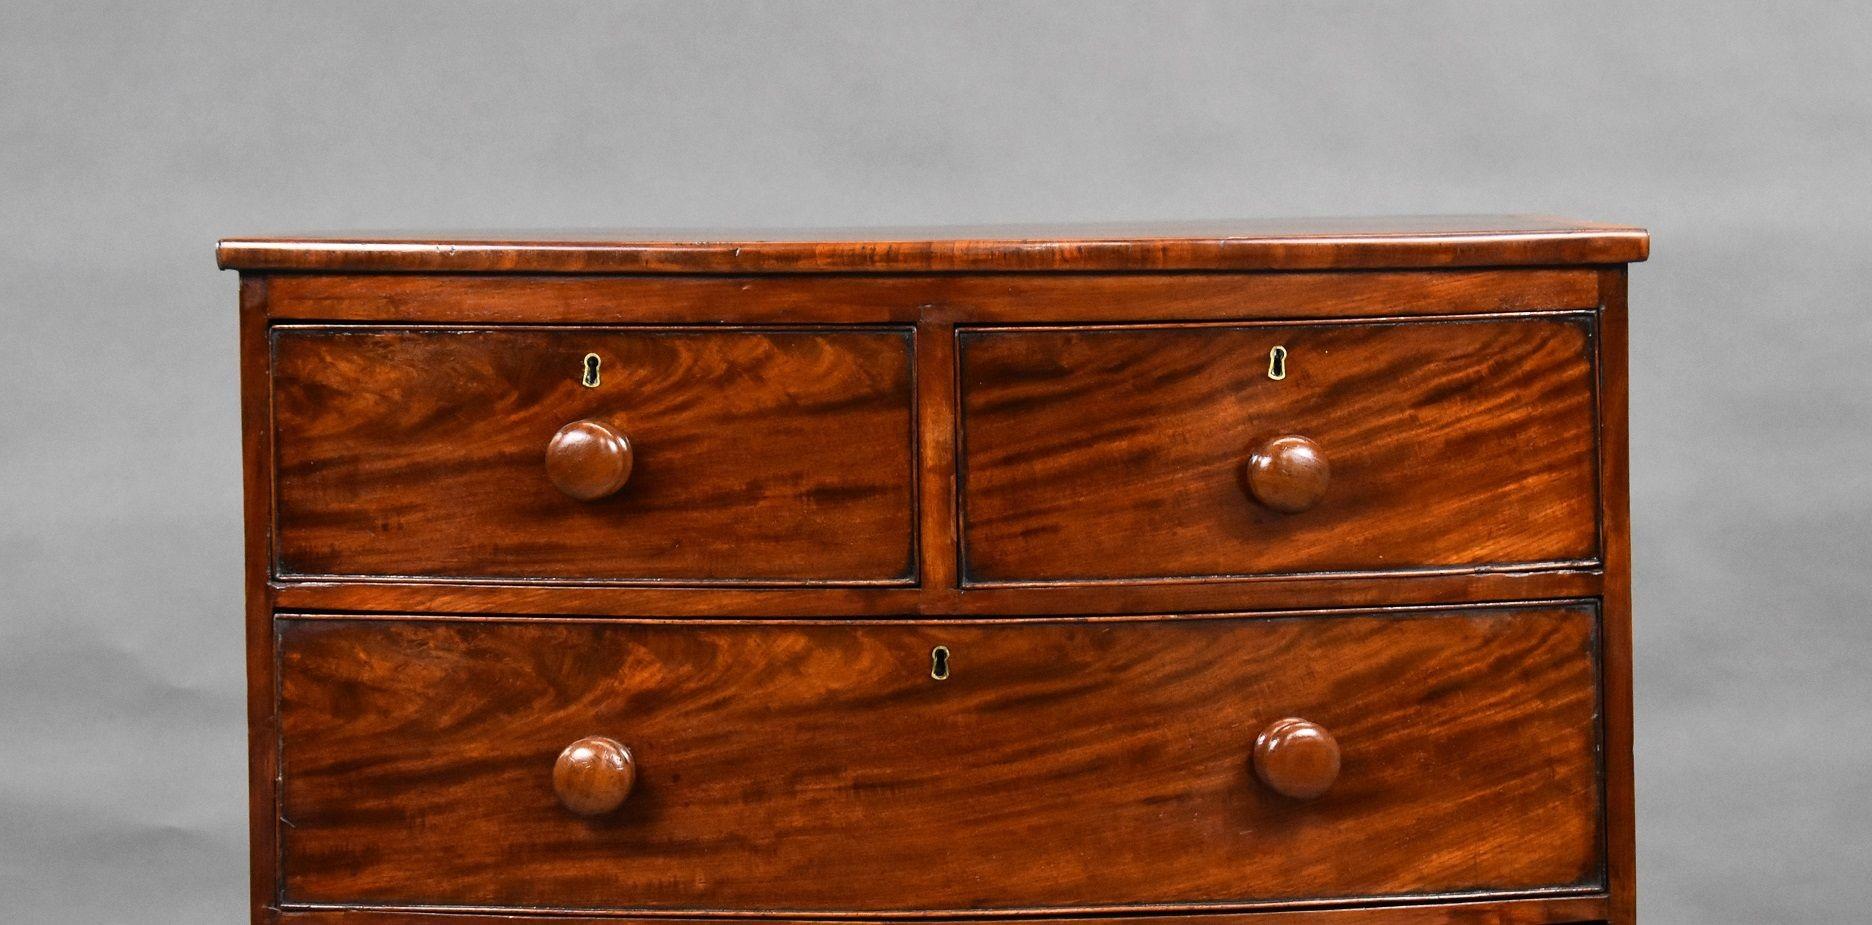 Regency Mahogany Bow Front Chest of Drawers In Good Condition For Sale In Chelmsford, Essex